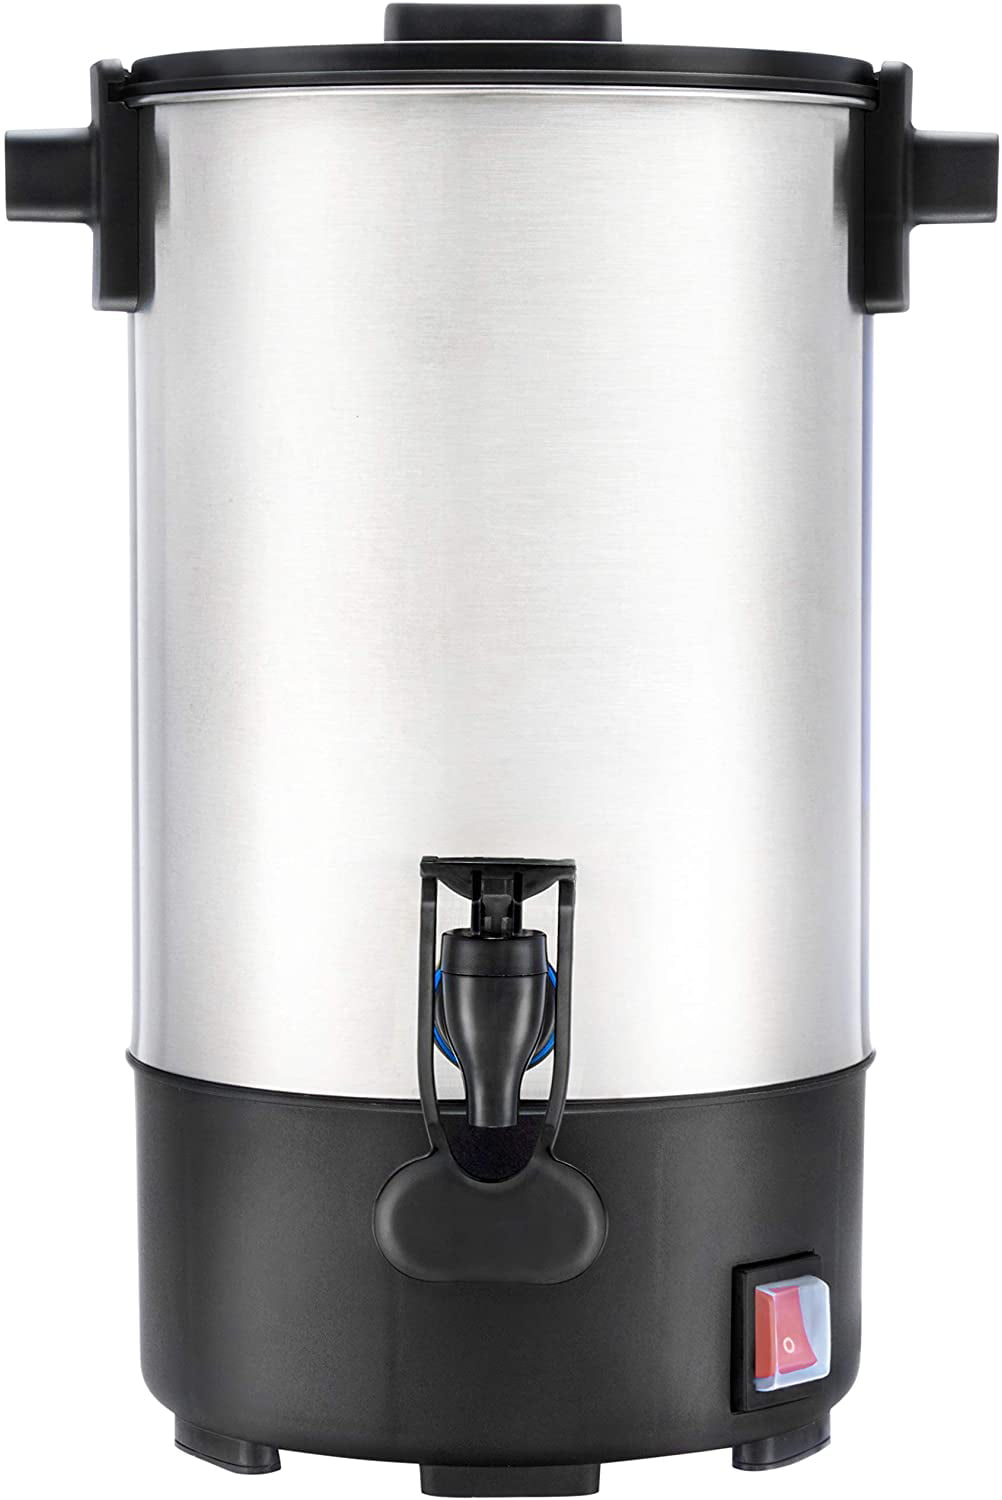 Hotel Commercial Large Coffee Urn Insulated Barrel Thermos Bucket for Parties Stainless Steel Keeps hot Beverages HOT! Hot Water and Beverage Dispenser with Spigot Buffet